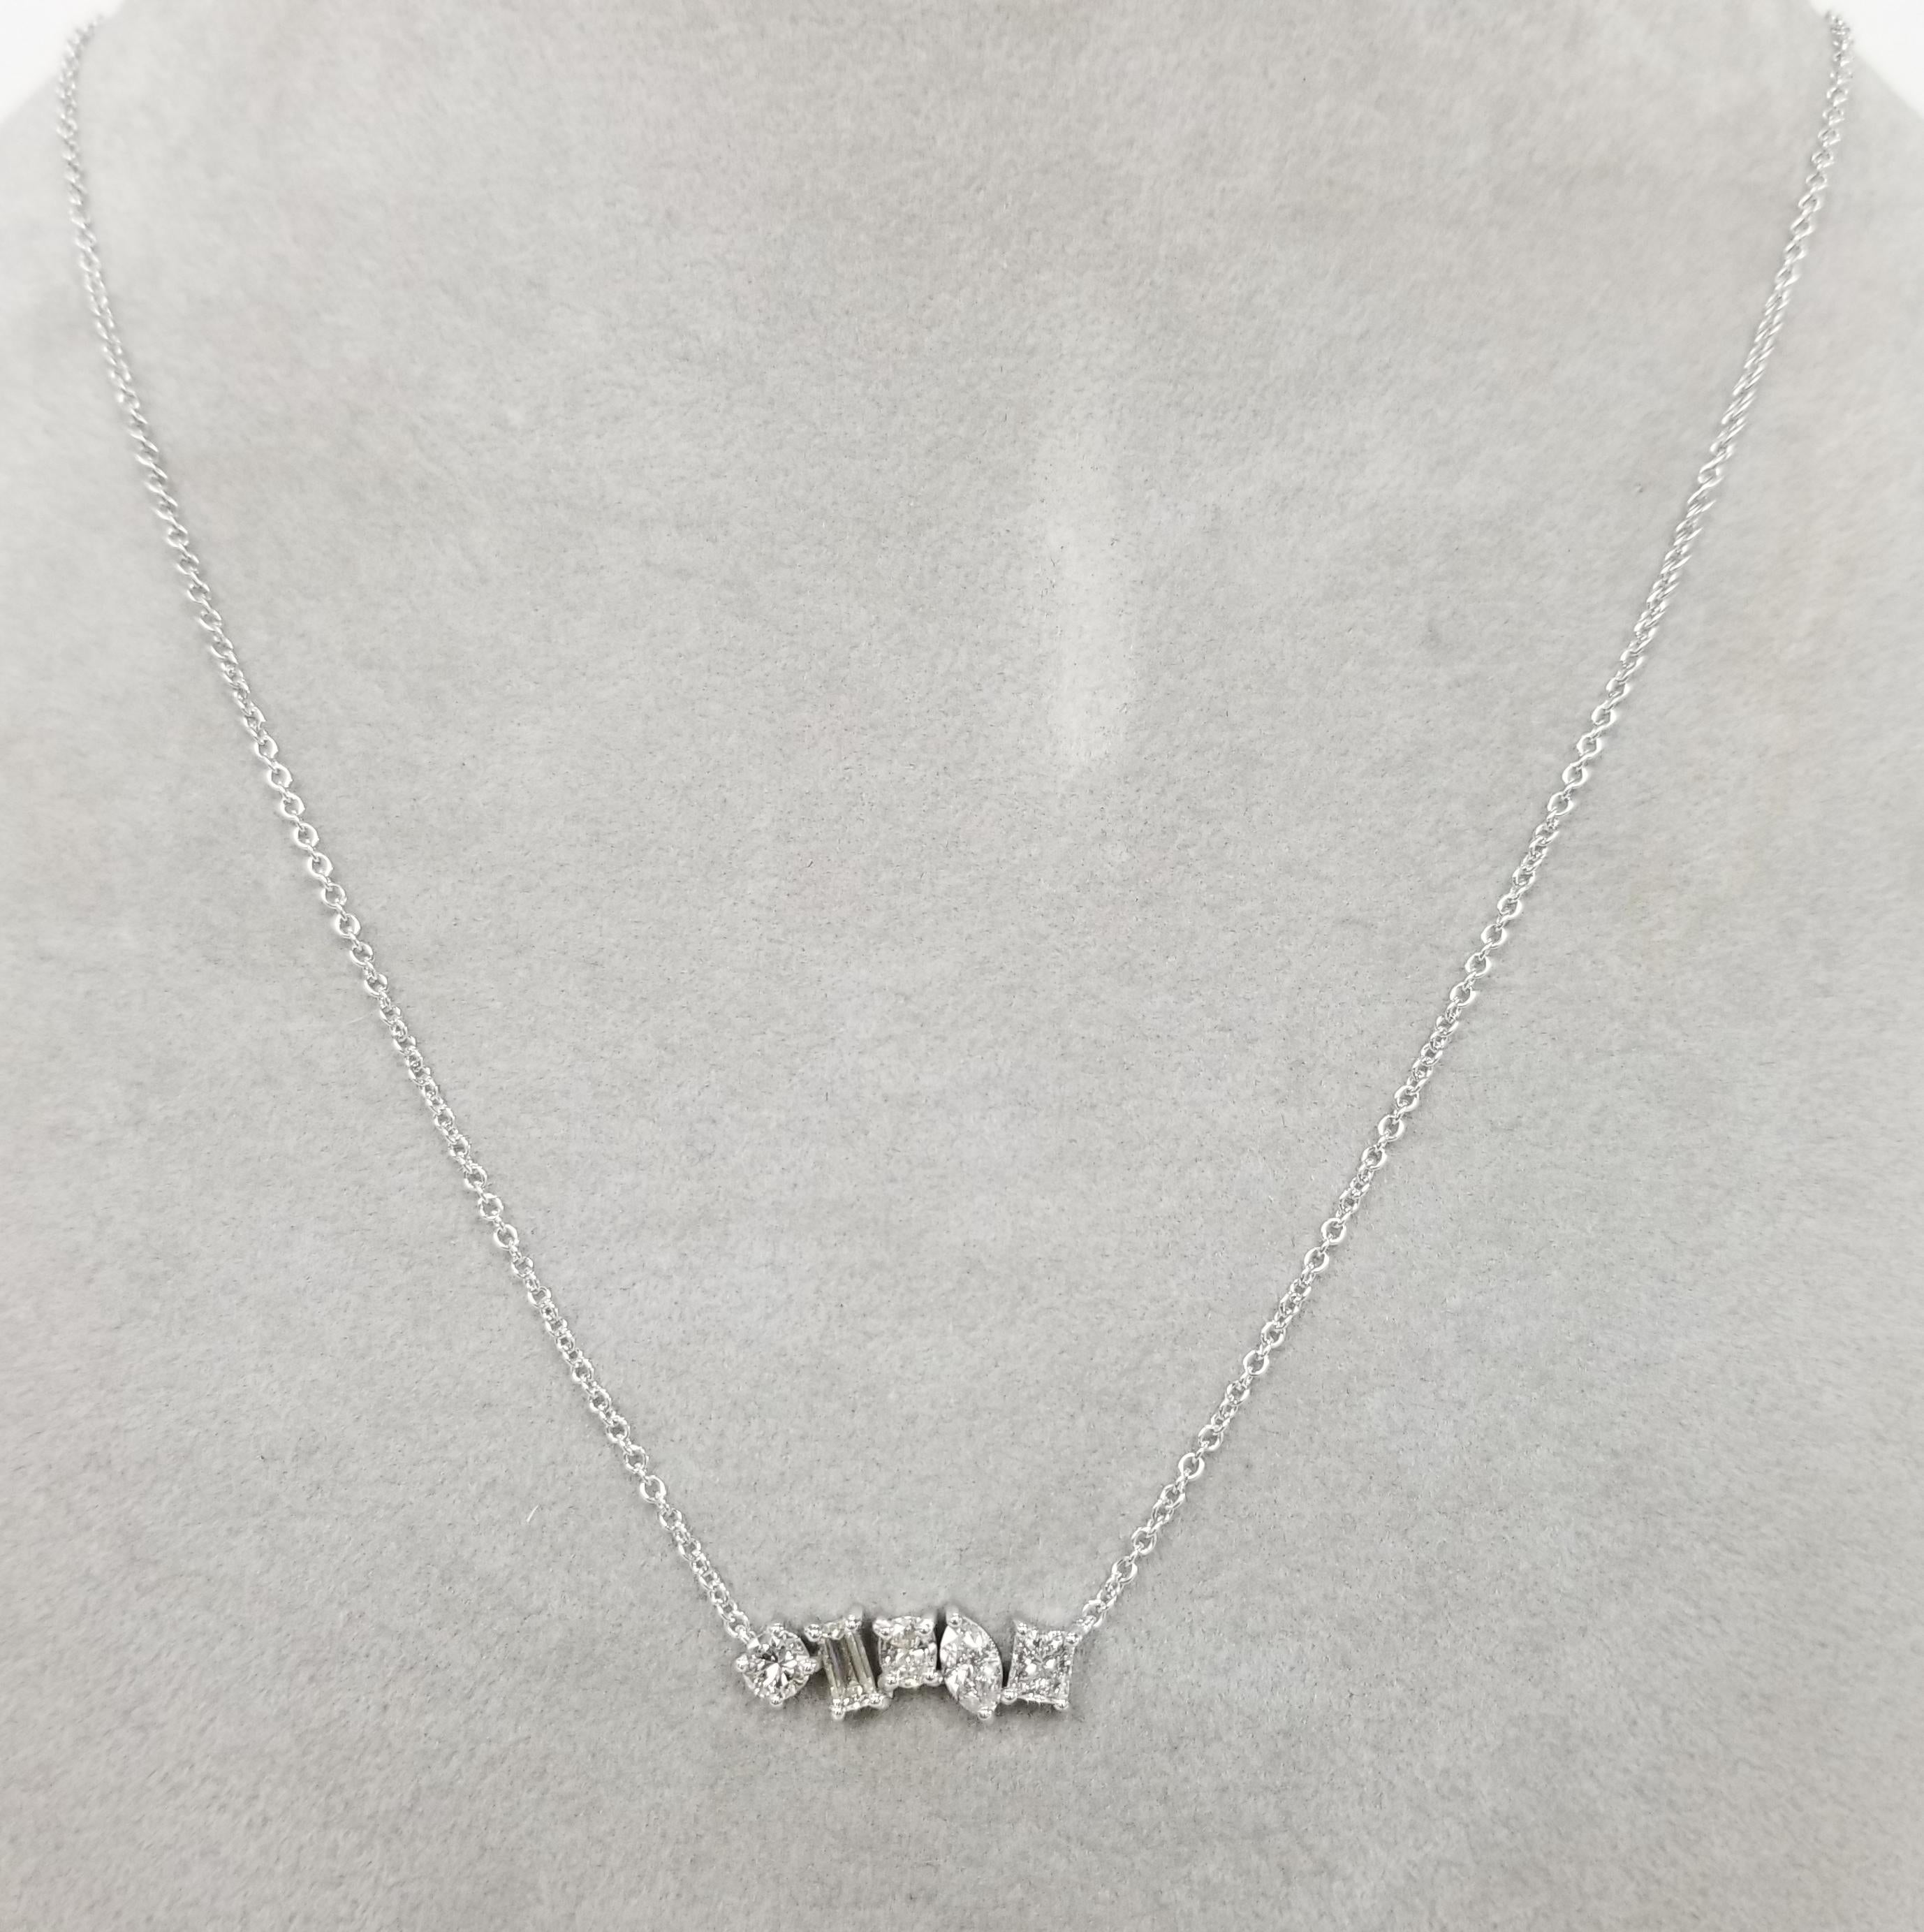 14k white gold 5 different cut  prong set diamond necklace with 1.20cts. in diamonds
Specifications:
    main stone: ROUND DIAMONDS
    SIDE STONE: 5 PCS ROUND CUT DIAMONDS
    carat total weight: 1.20 CTW
    color: G
    clarity: VS2-SI1
   